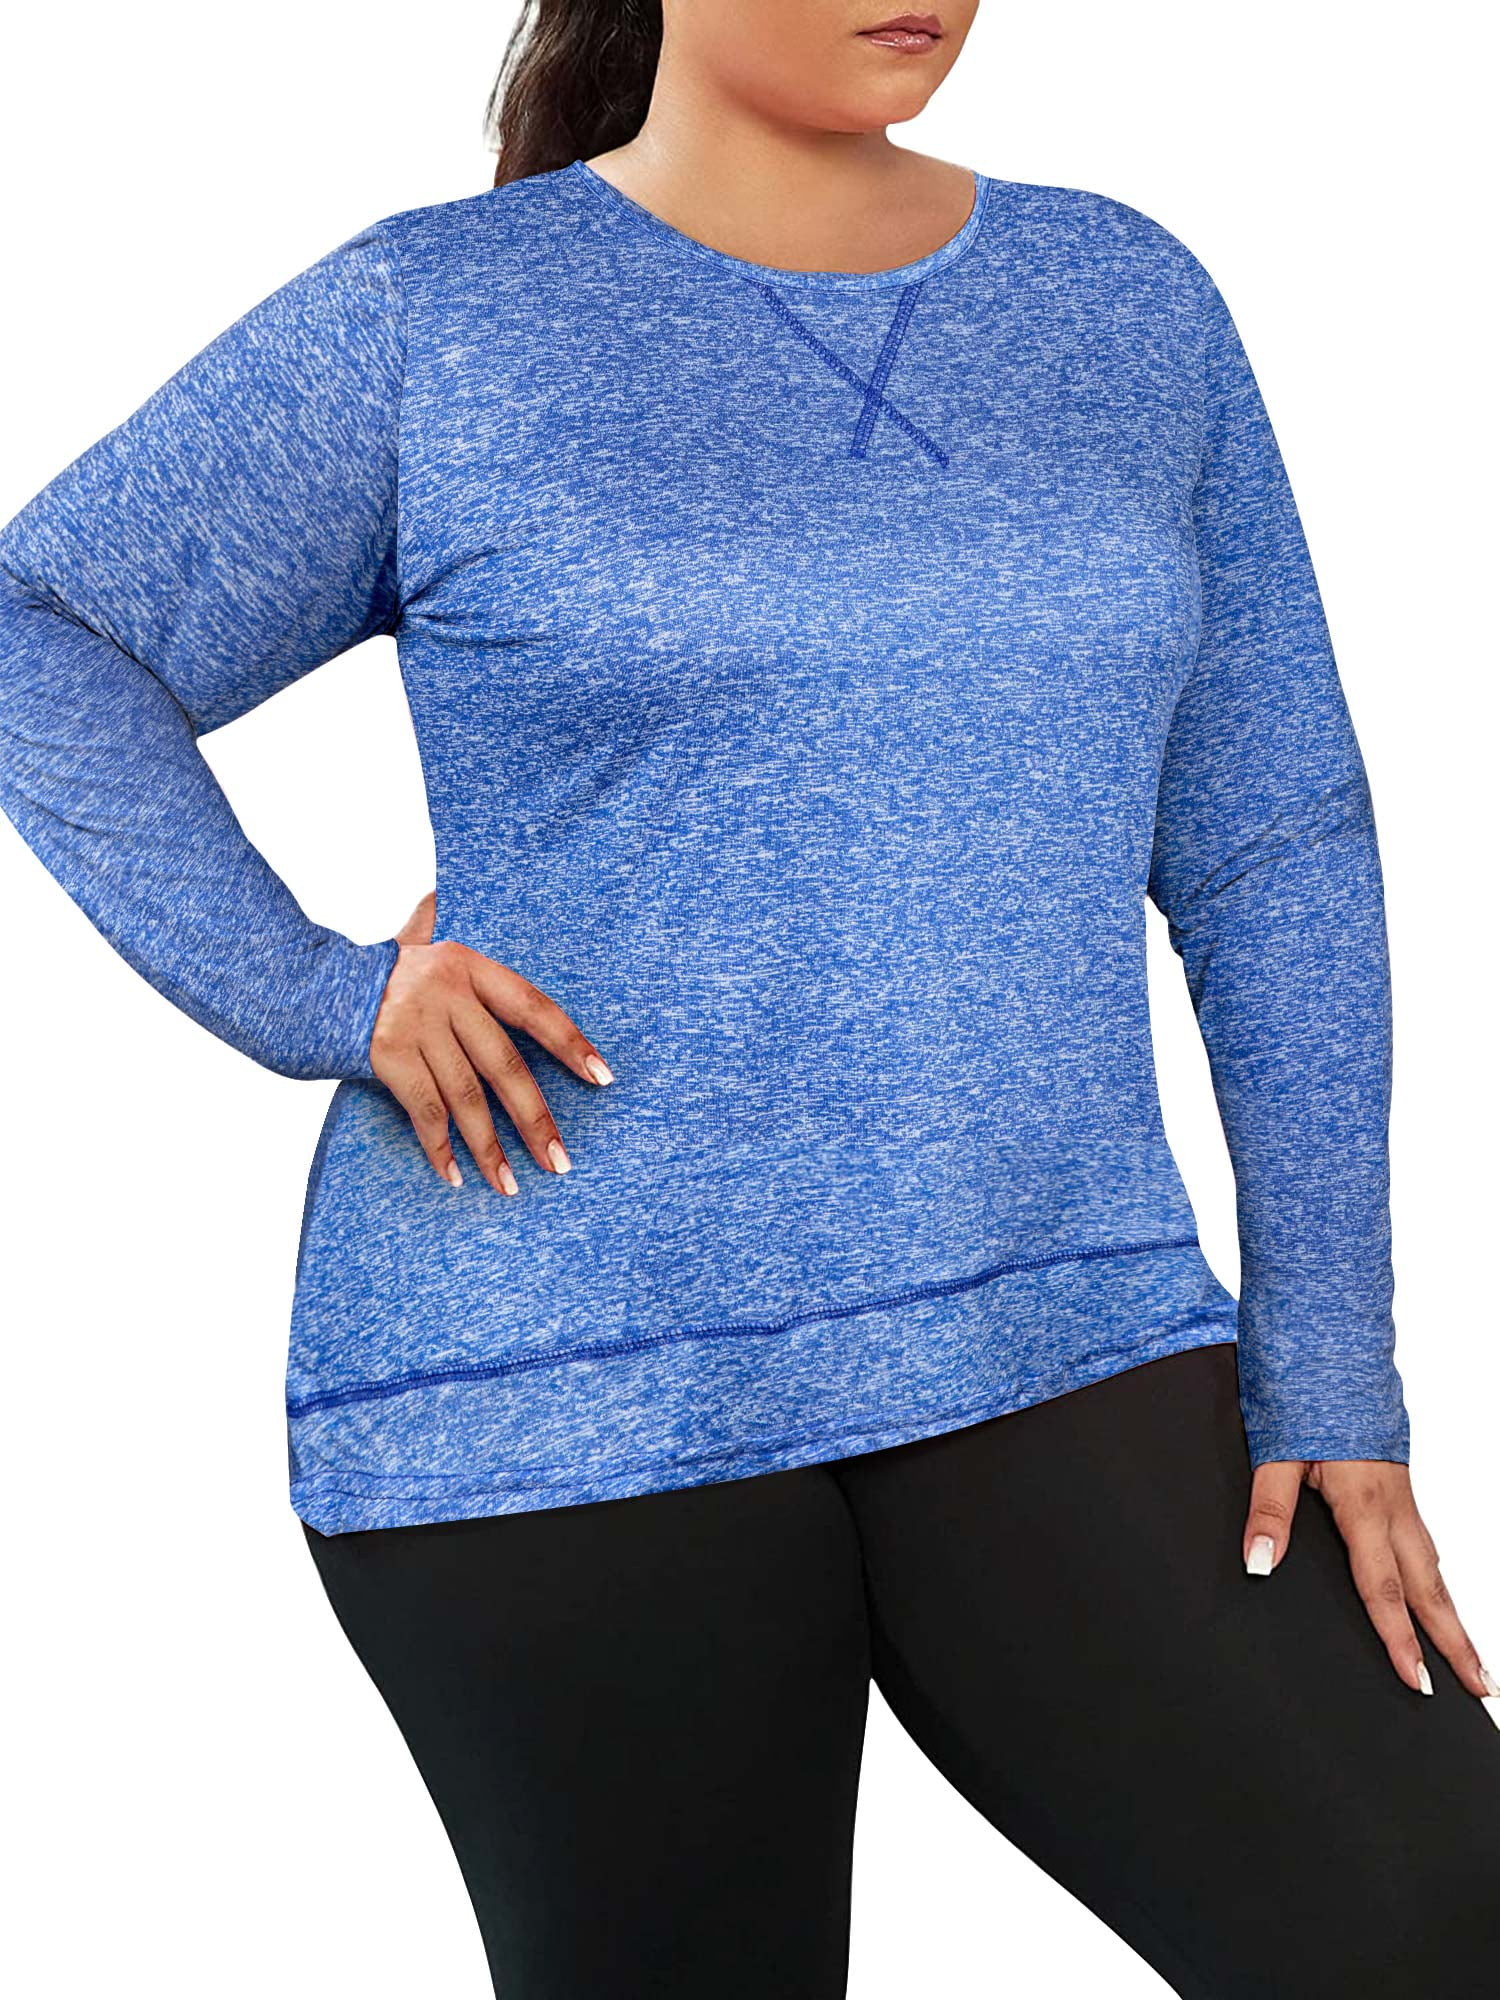 Womens Plus Size Long Sleeve Workout Tops Athletic Quick Dry Running Shirts  